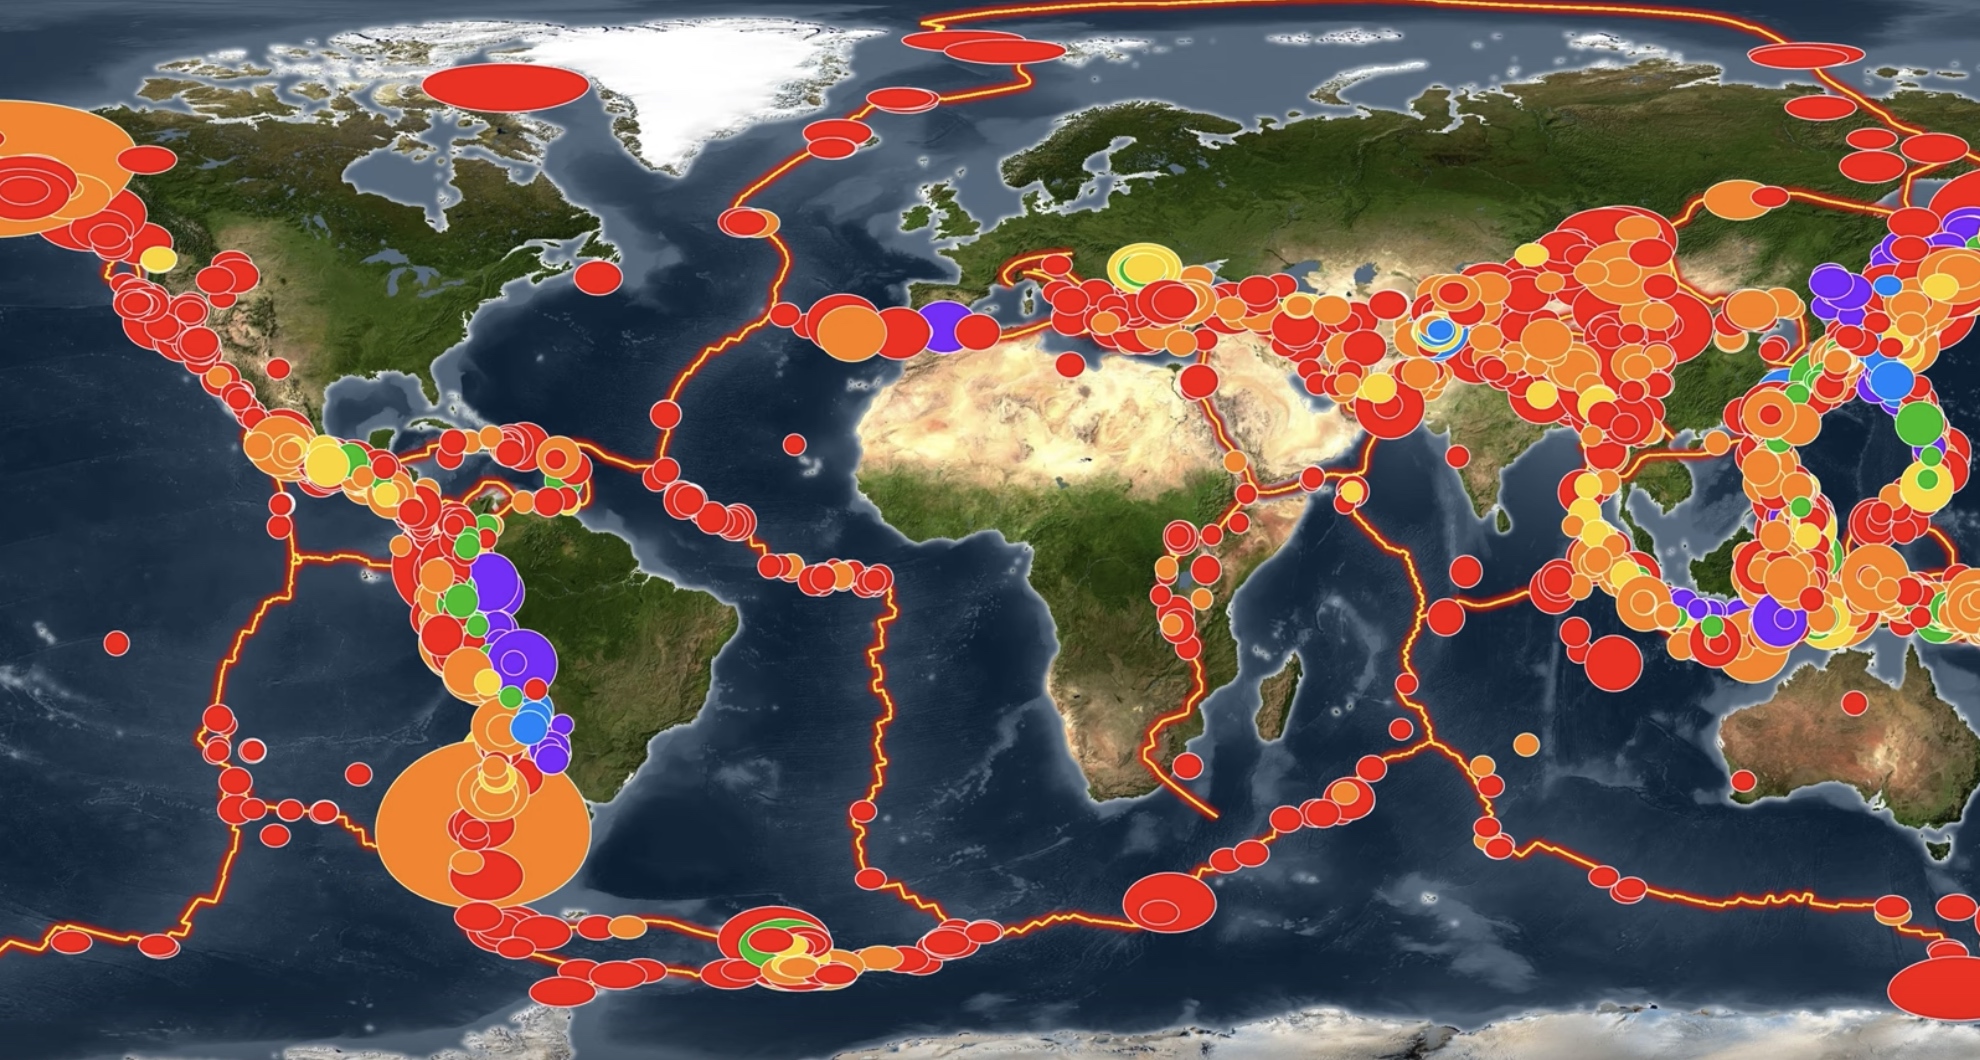 Earthquake Map Of The World - United States Map